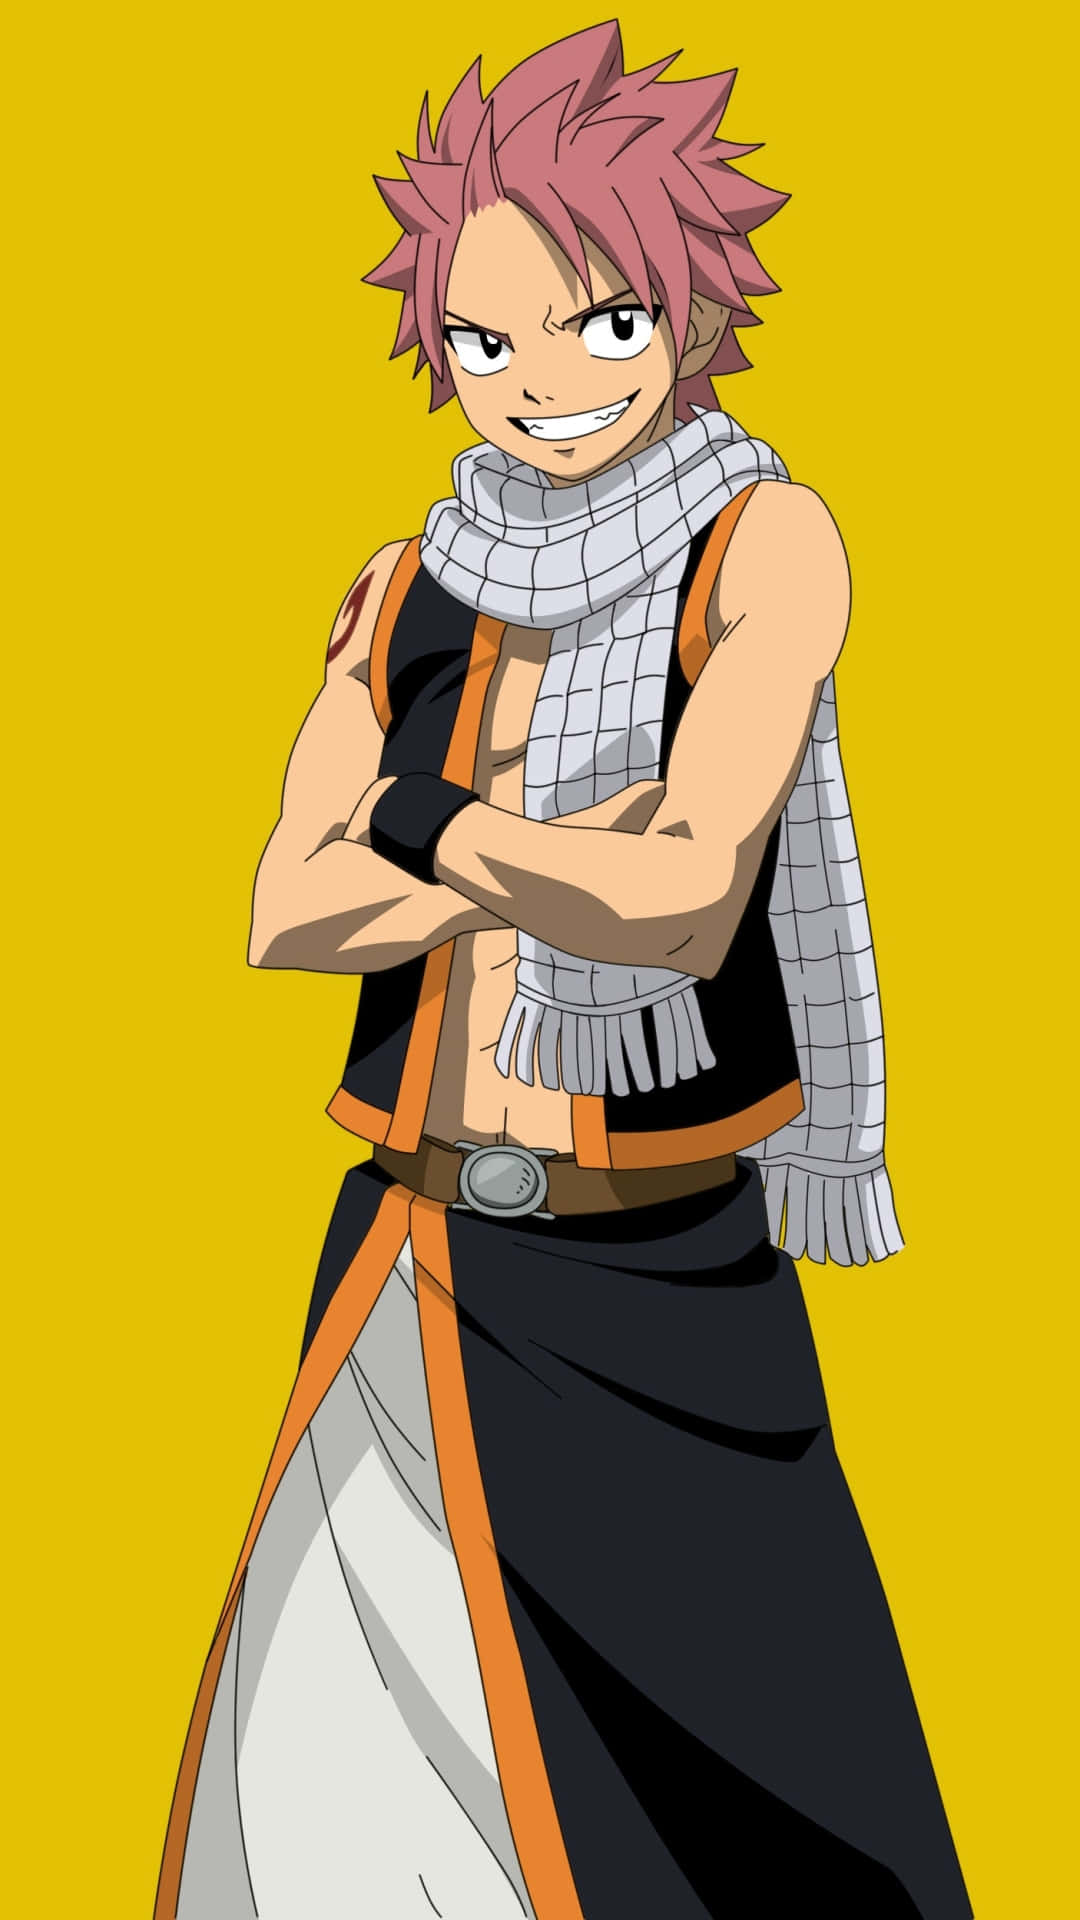 Fairy Tail: Natsu's 10 Best Quotes